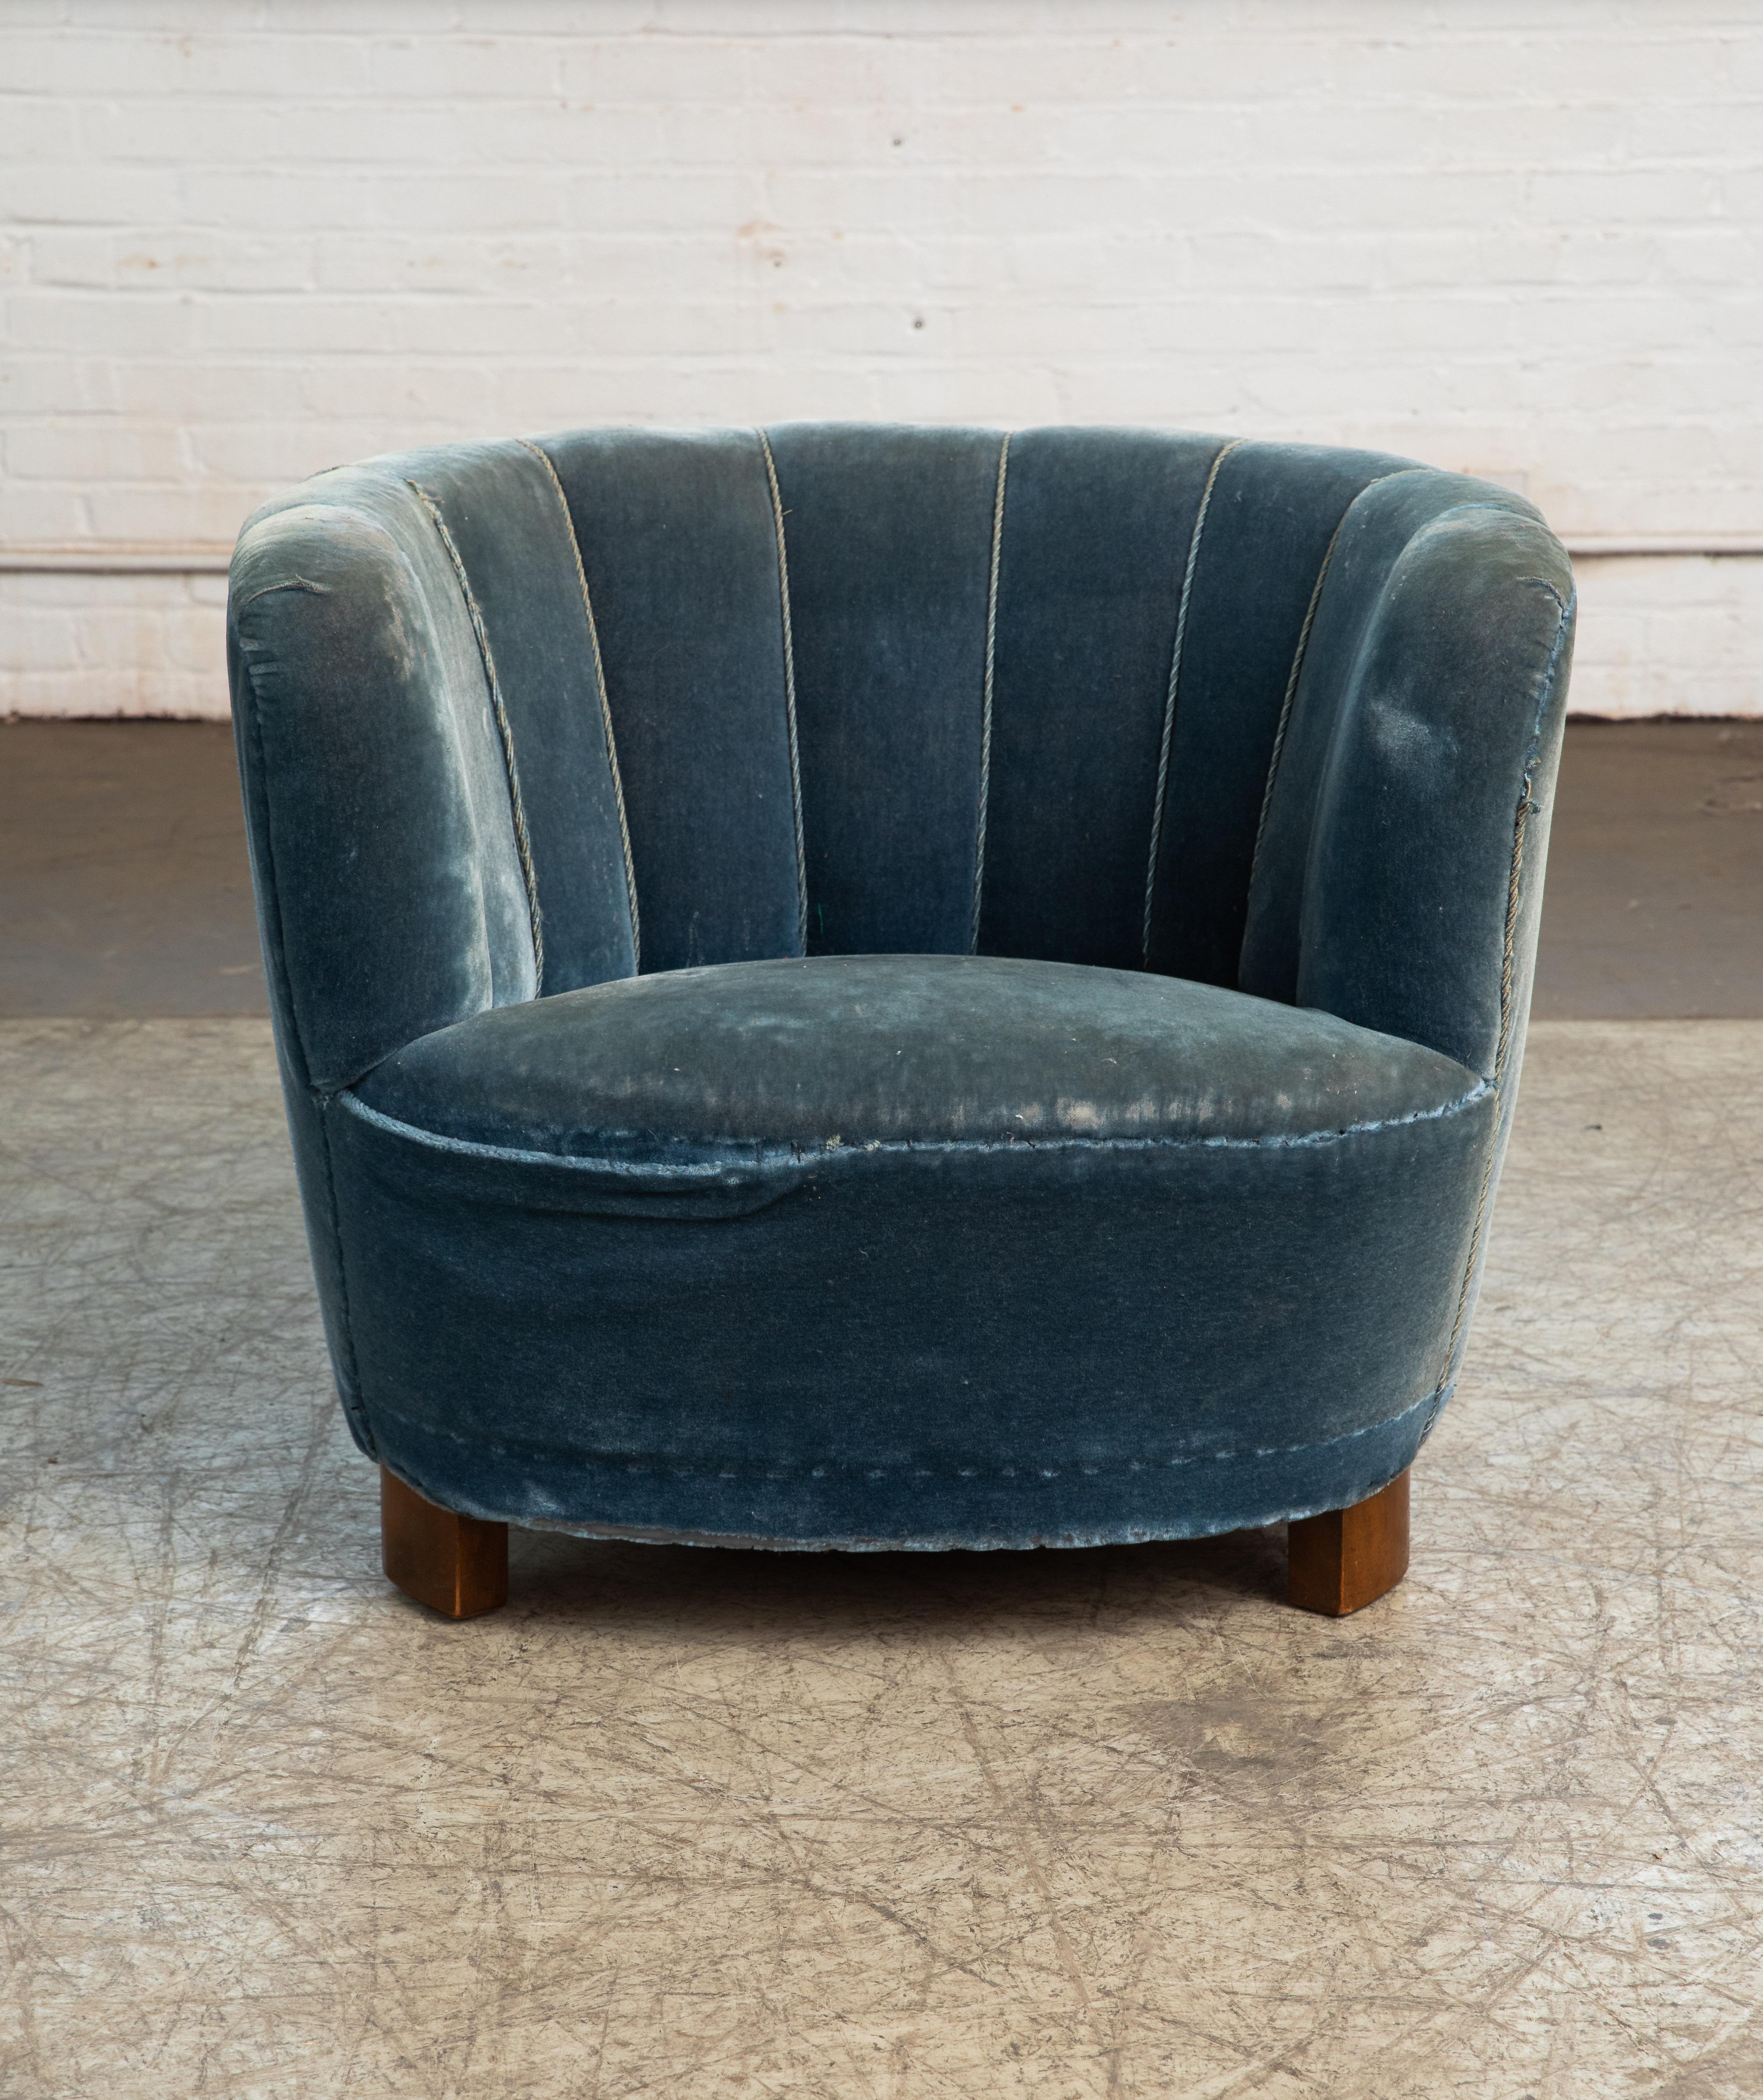 This supercool 1940s Danish curved club chair is actually a match to the Danish curved or banana form sofas made in the 1930s-1940s. The sofas and chairs were very popular coming out of the 1930s and into the early 1940s inspired by the Art Deco